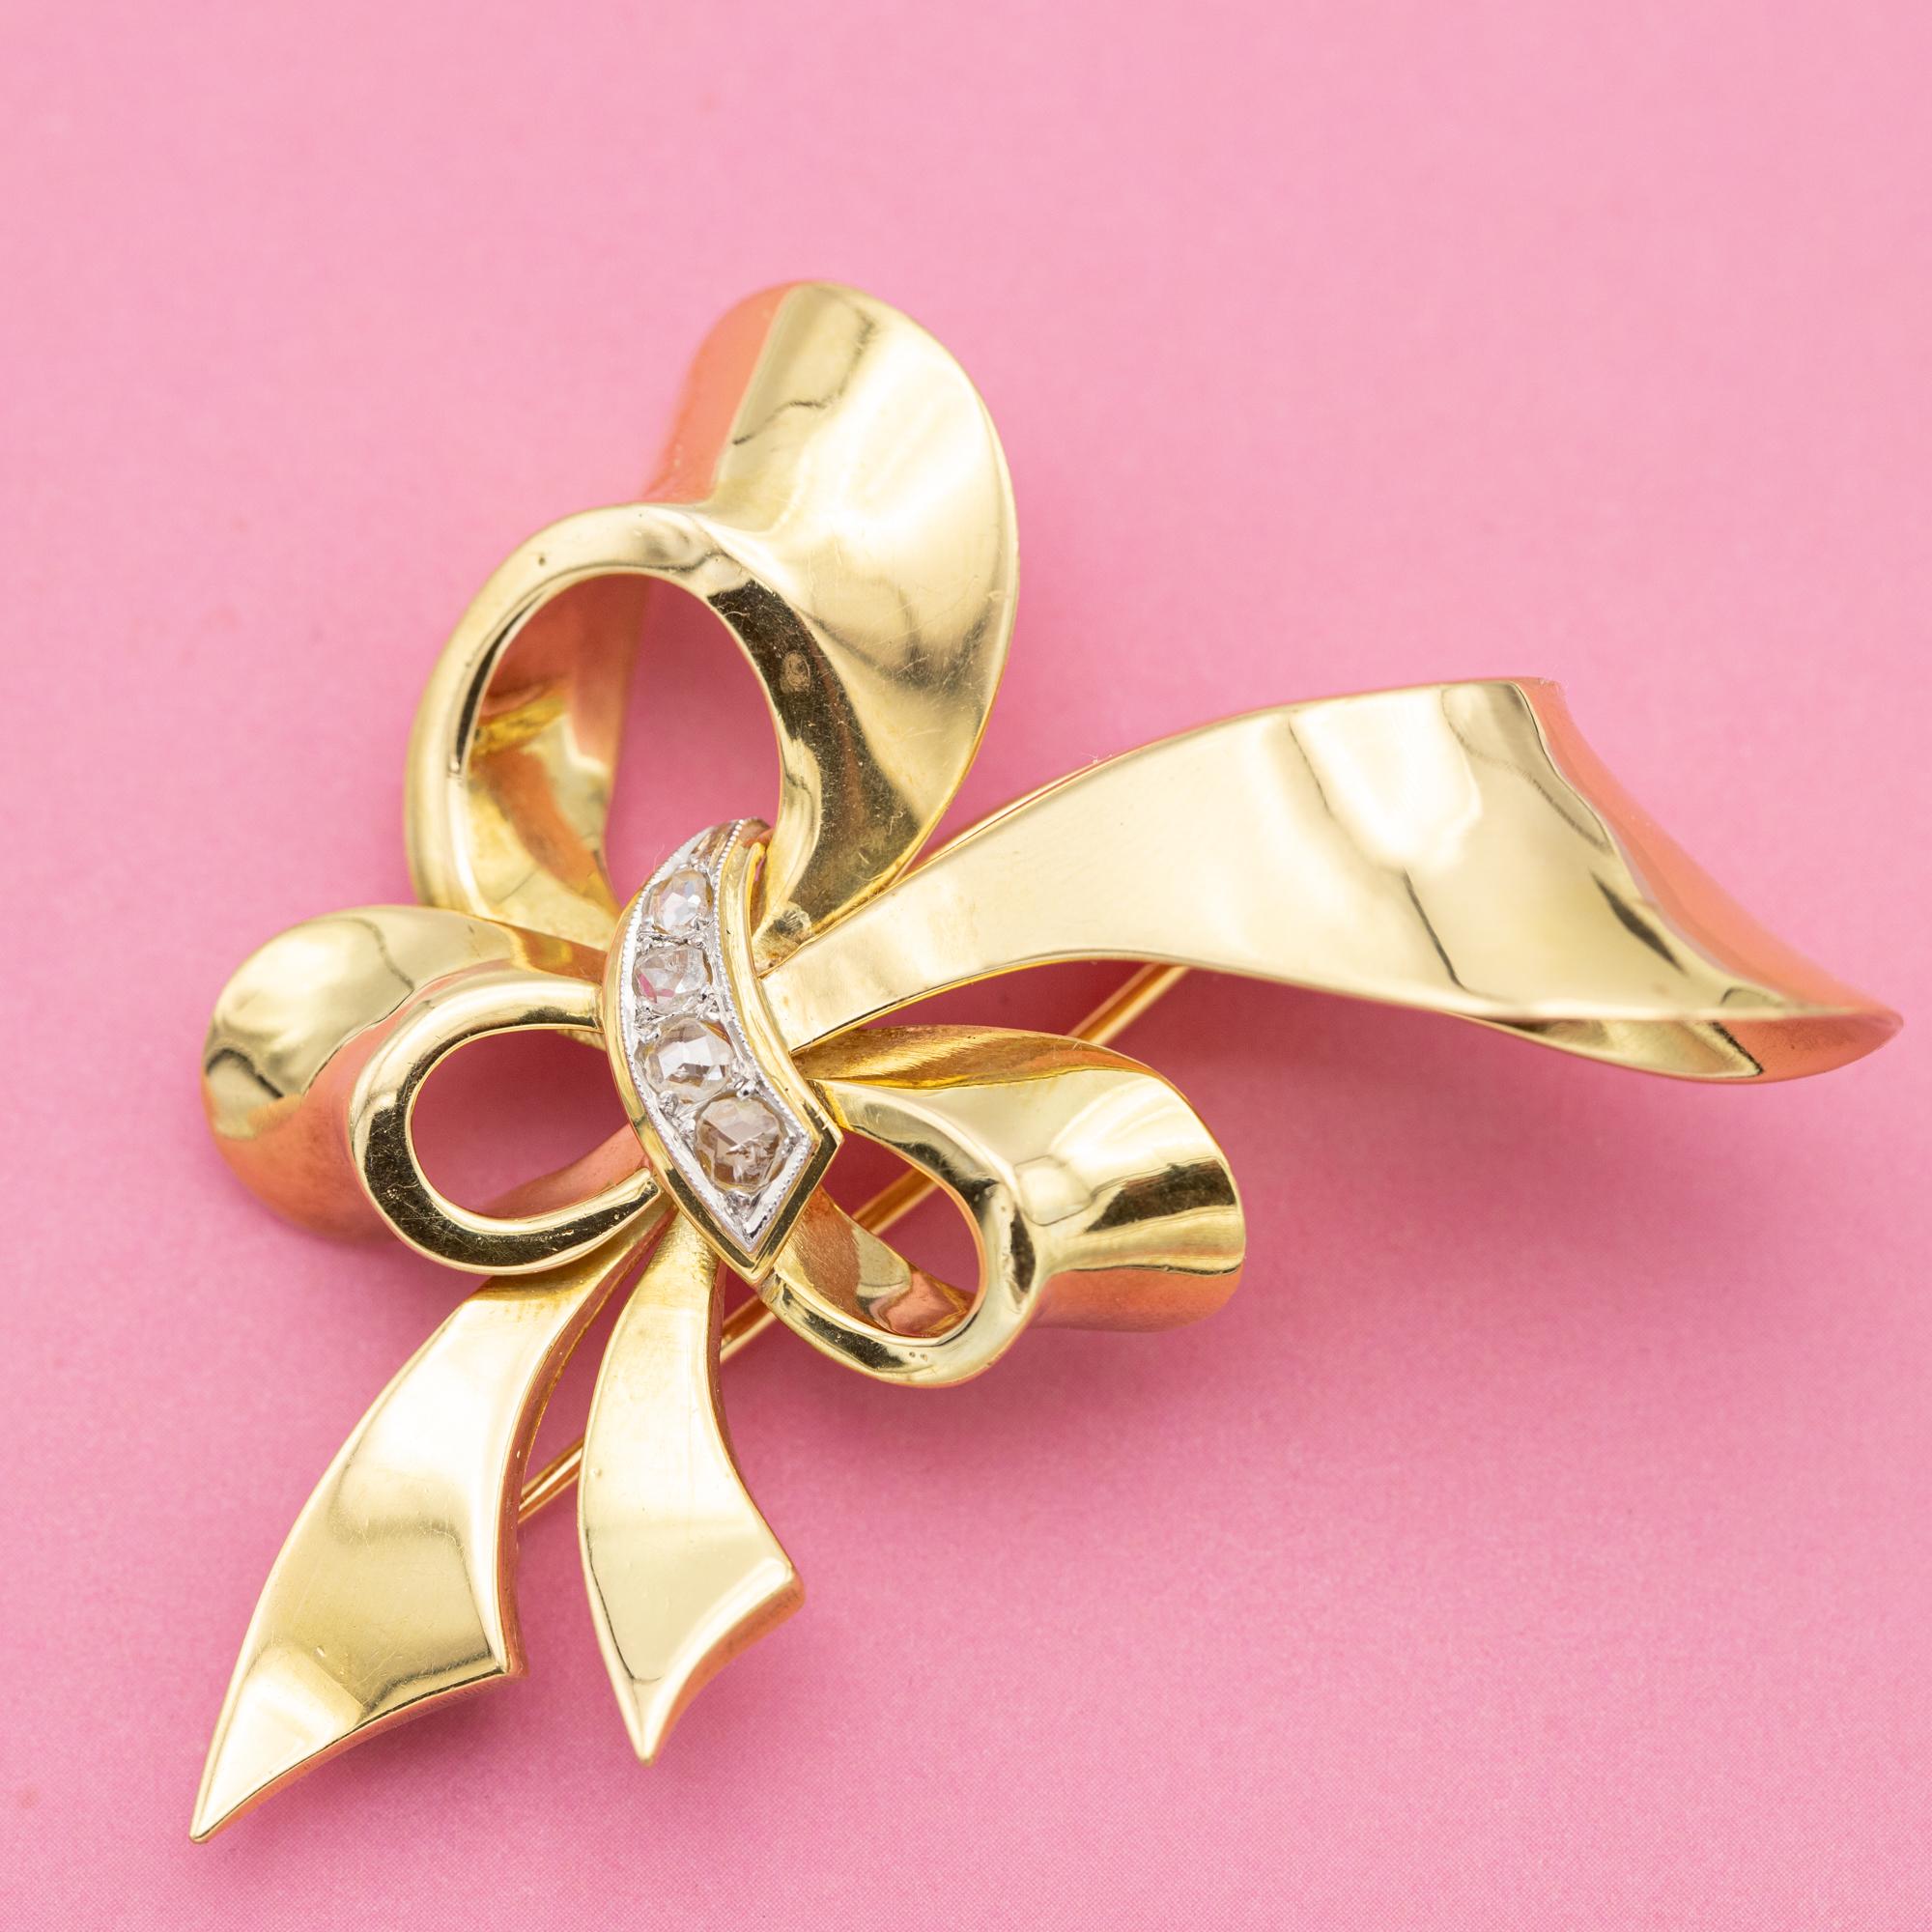 Women's or Men's Heavy Elegant 18k bow Brooch - 1940's collar pin - solid gold rose cut diamonds For Sale